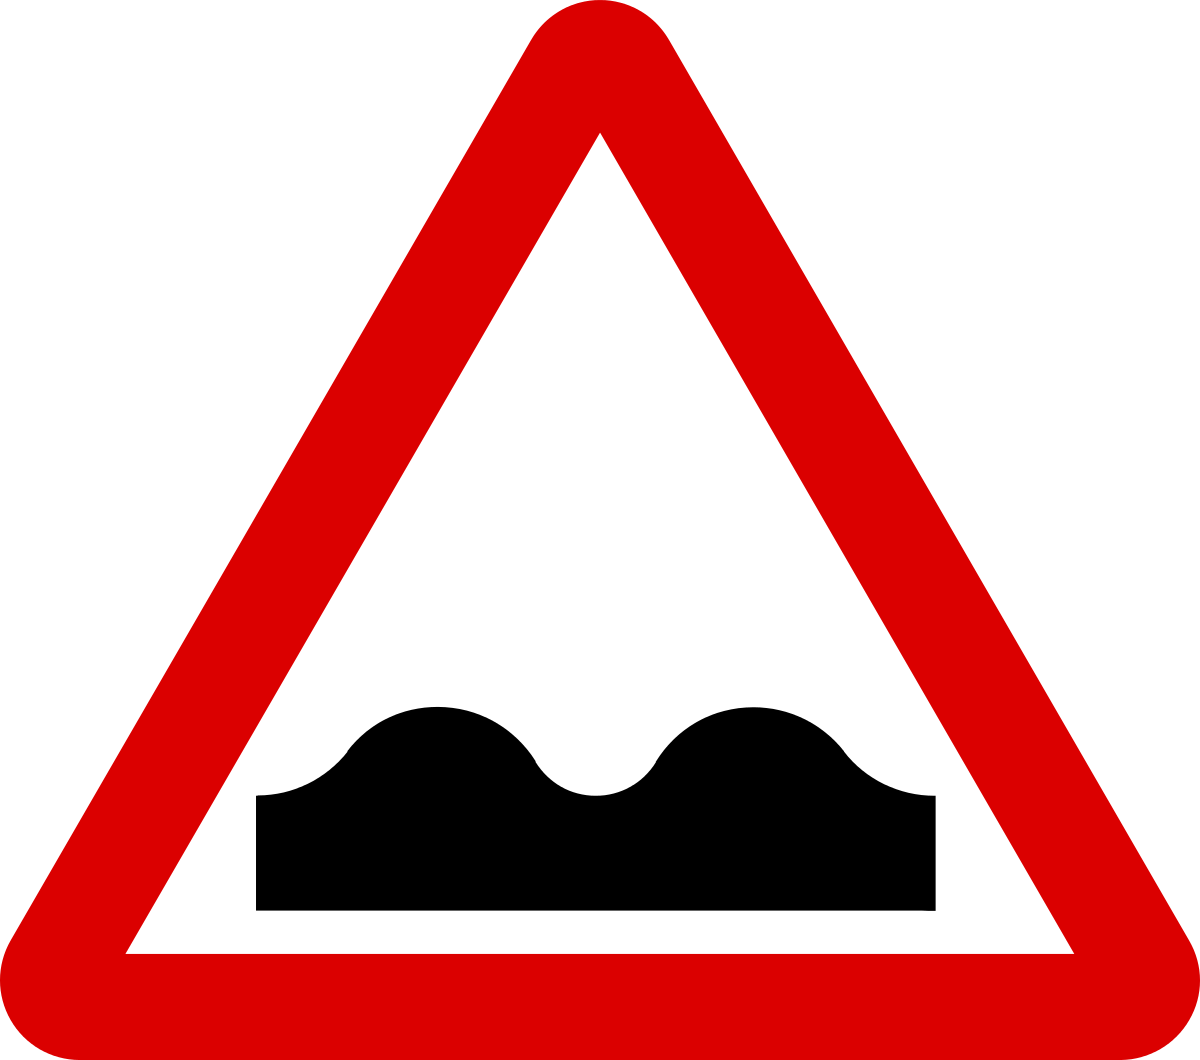 File:Mauritius Road Signs - Warning Sign - Uneven road.svg ...